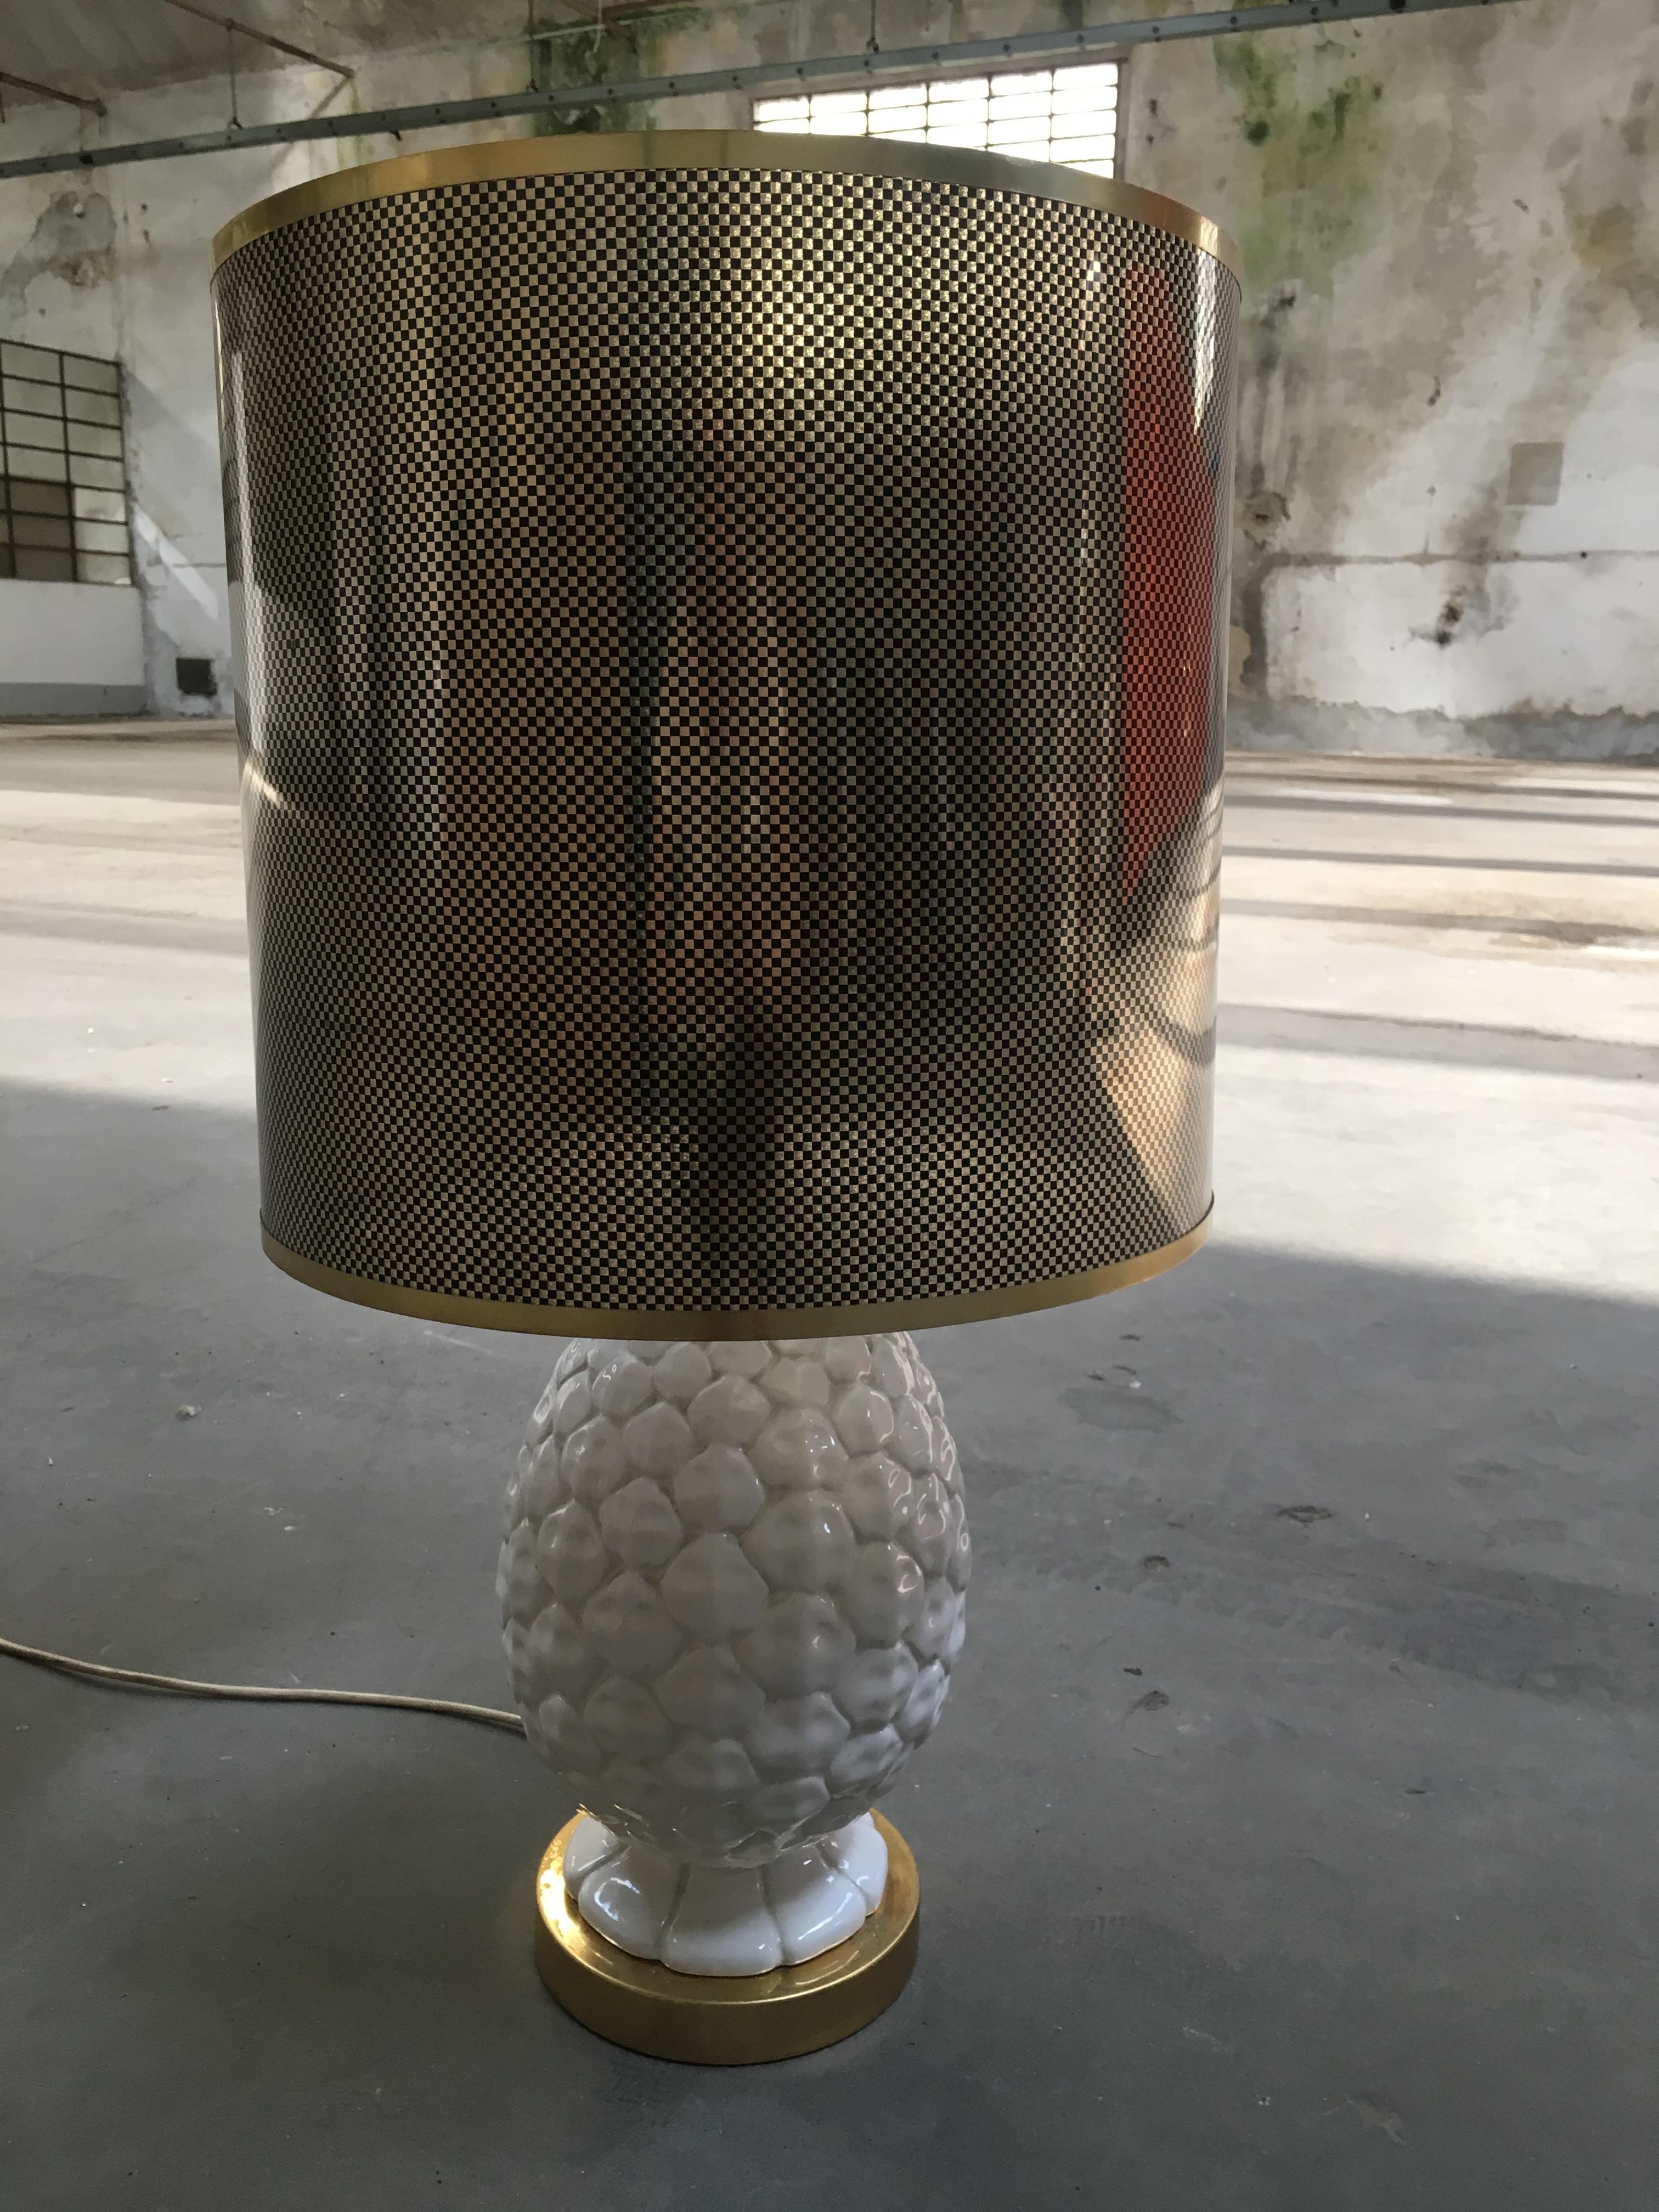 Mid-Century Modern Italian ceramic table lamp with gilt metal basement and original acrylic lampshade from 1970s.
The lamp has European electrification.
Measurements:
Table lamp: Diameter cm. 18 x height cm. 46
Lampshade: Diameter cm. 38 x